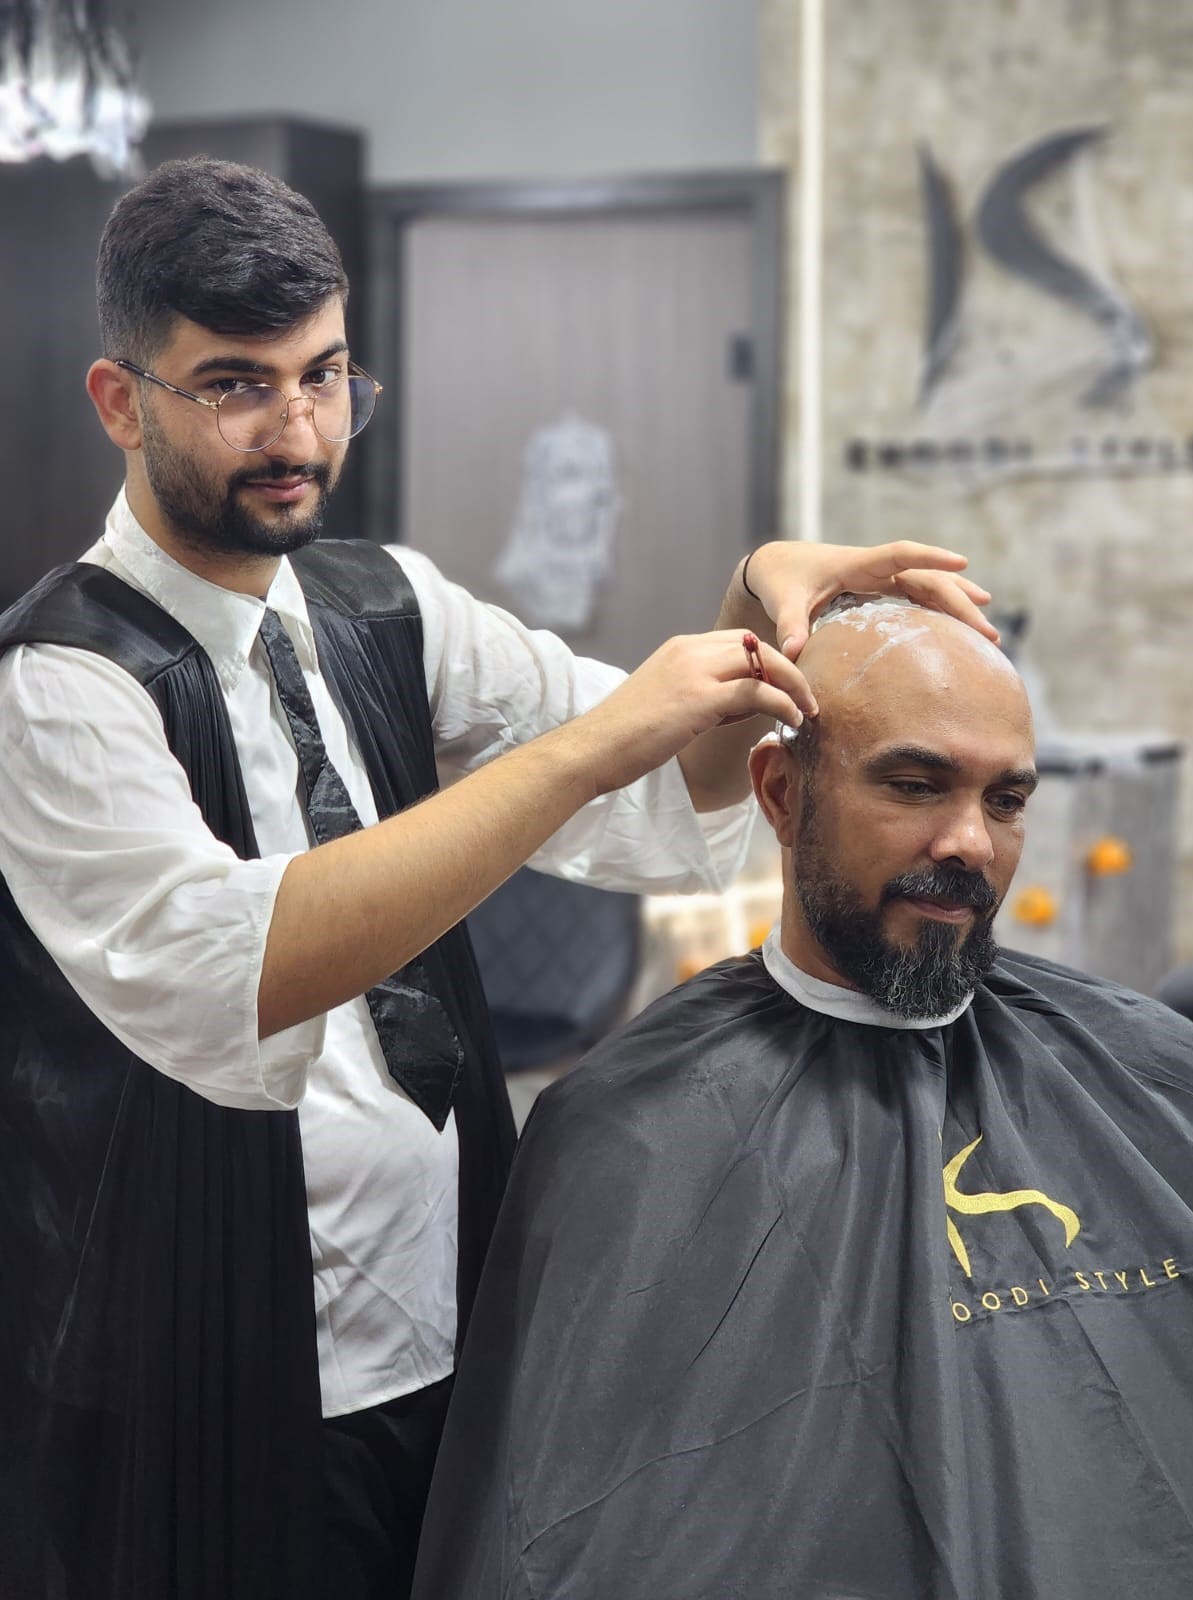 Shaving and Trimming Services for Men in Dubai